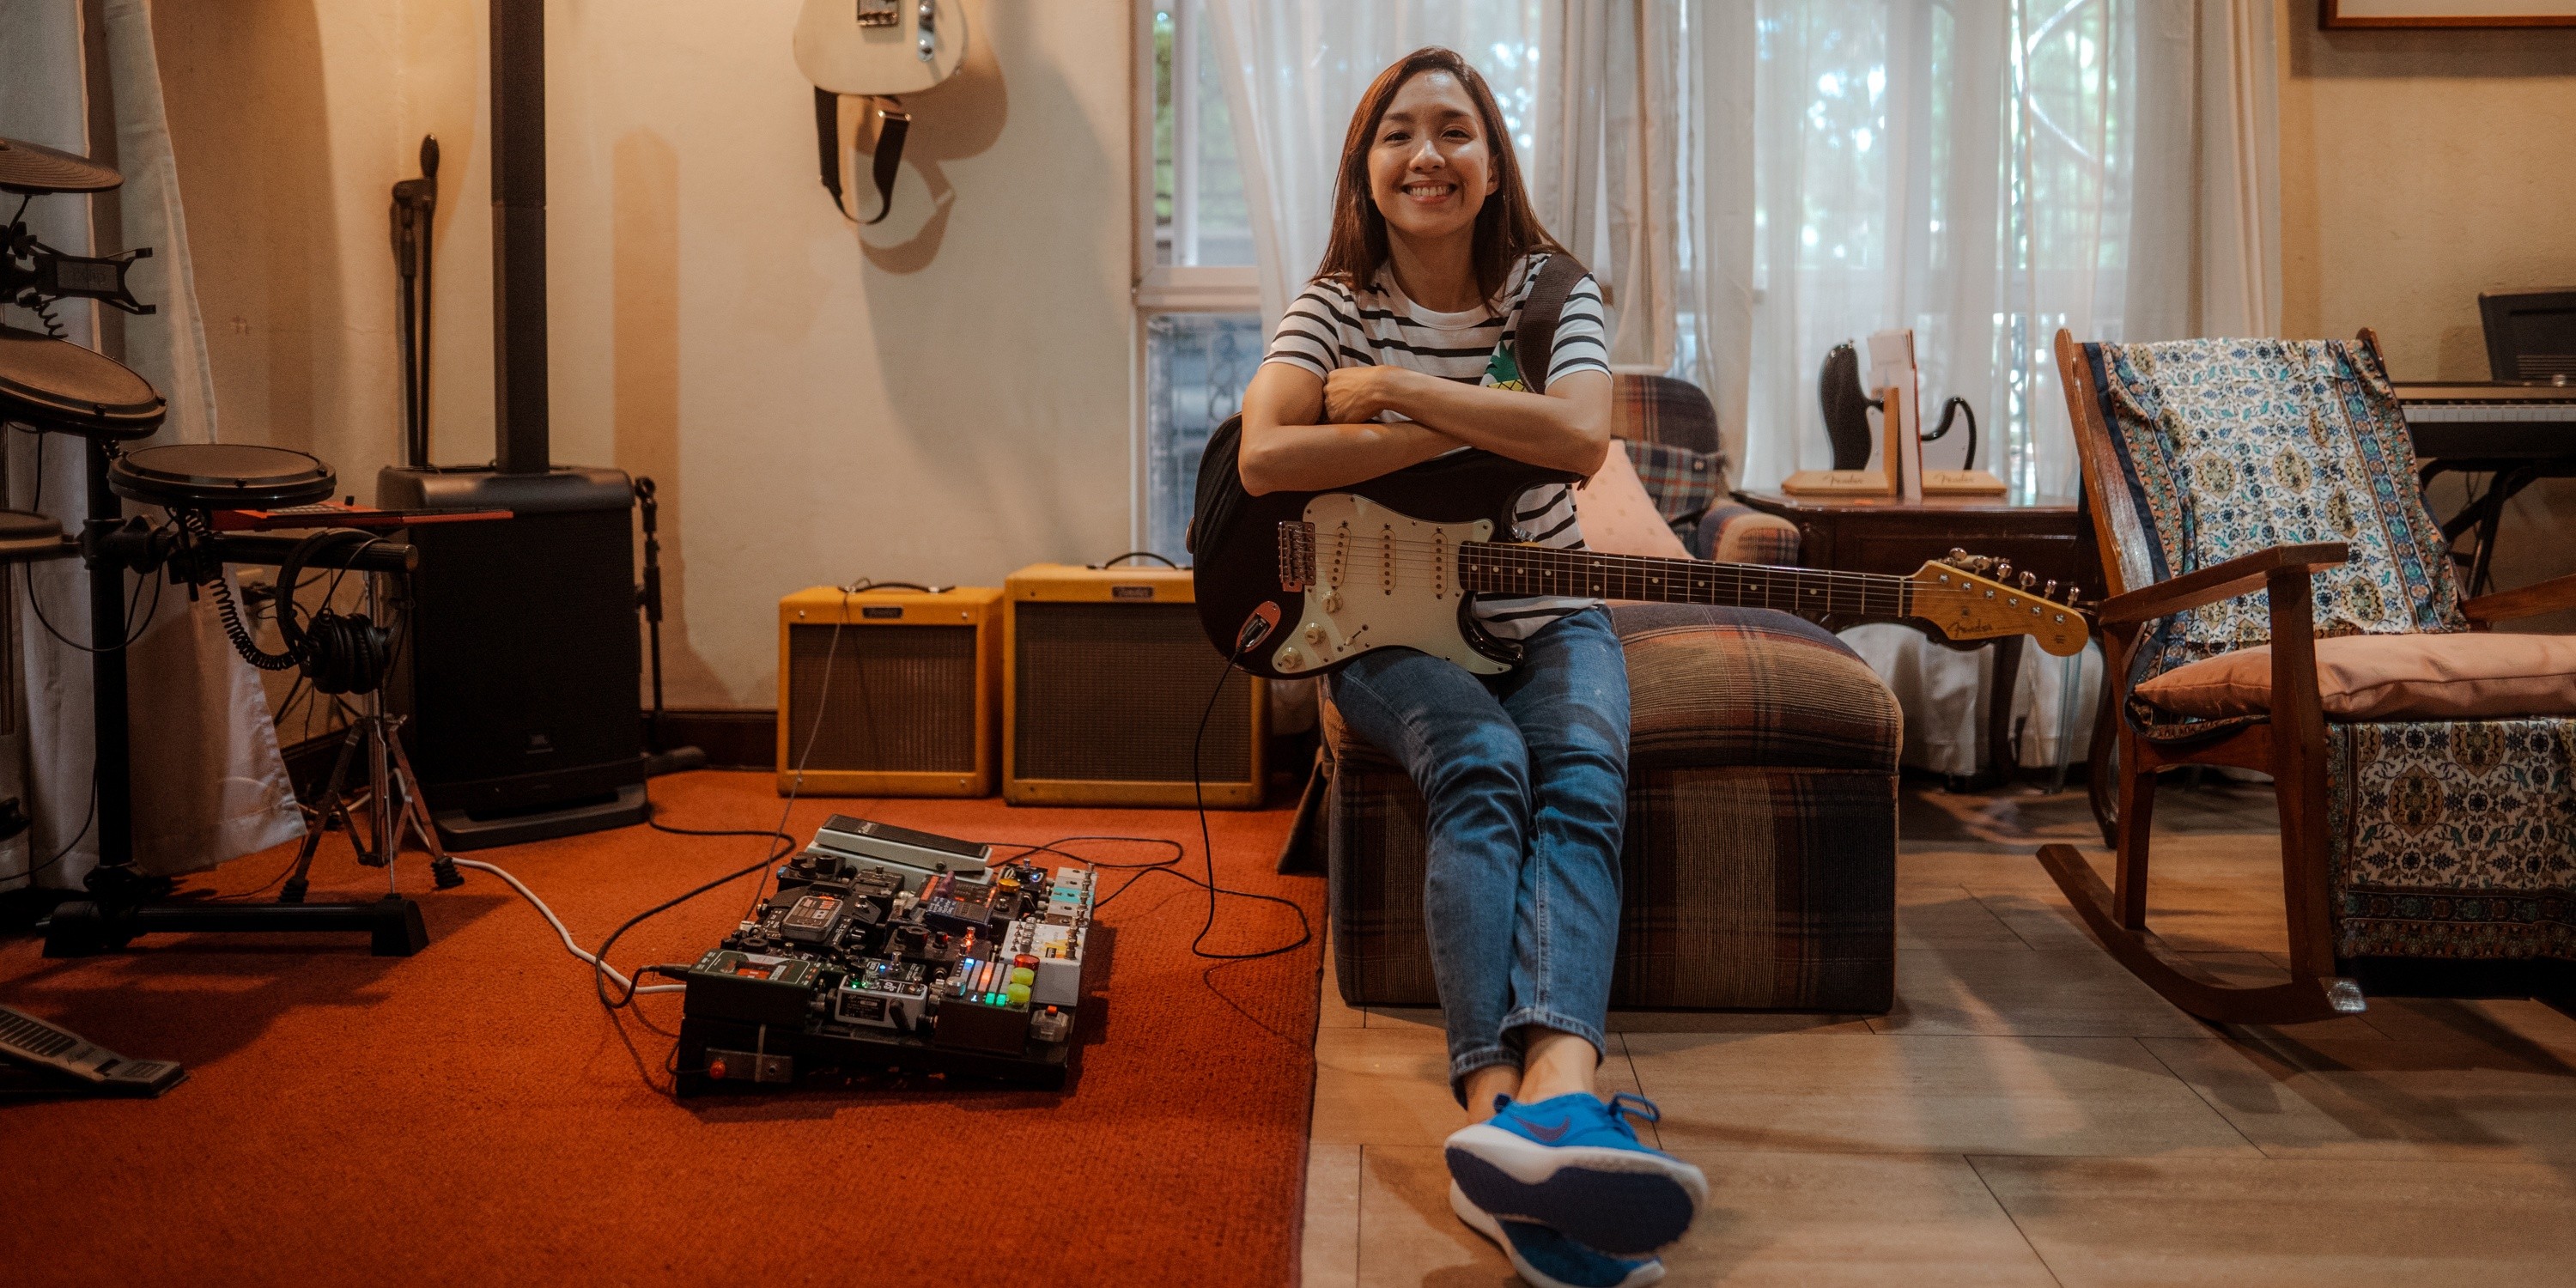 Barbie Almalbis talks new EP Tigre, getting over creative dry spells, and keeping music in the family – cover story